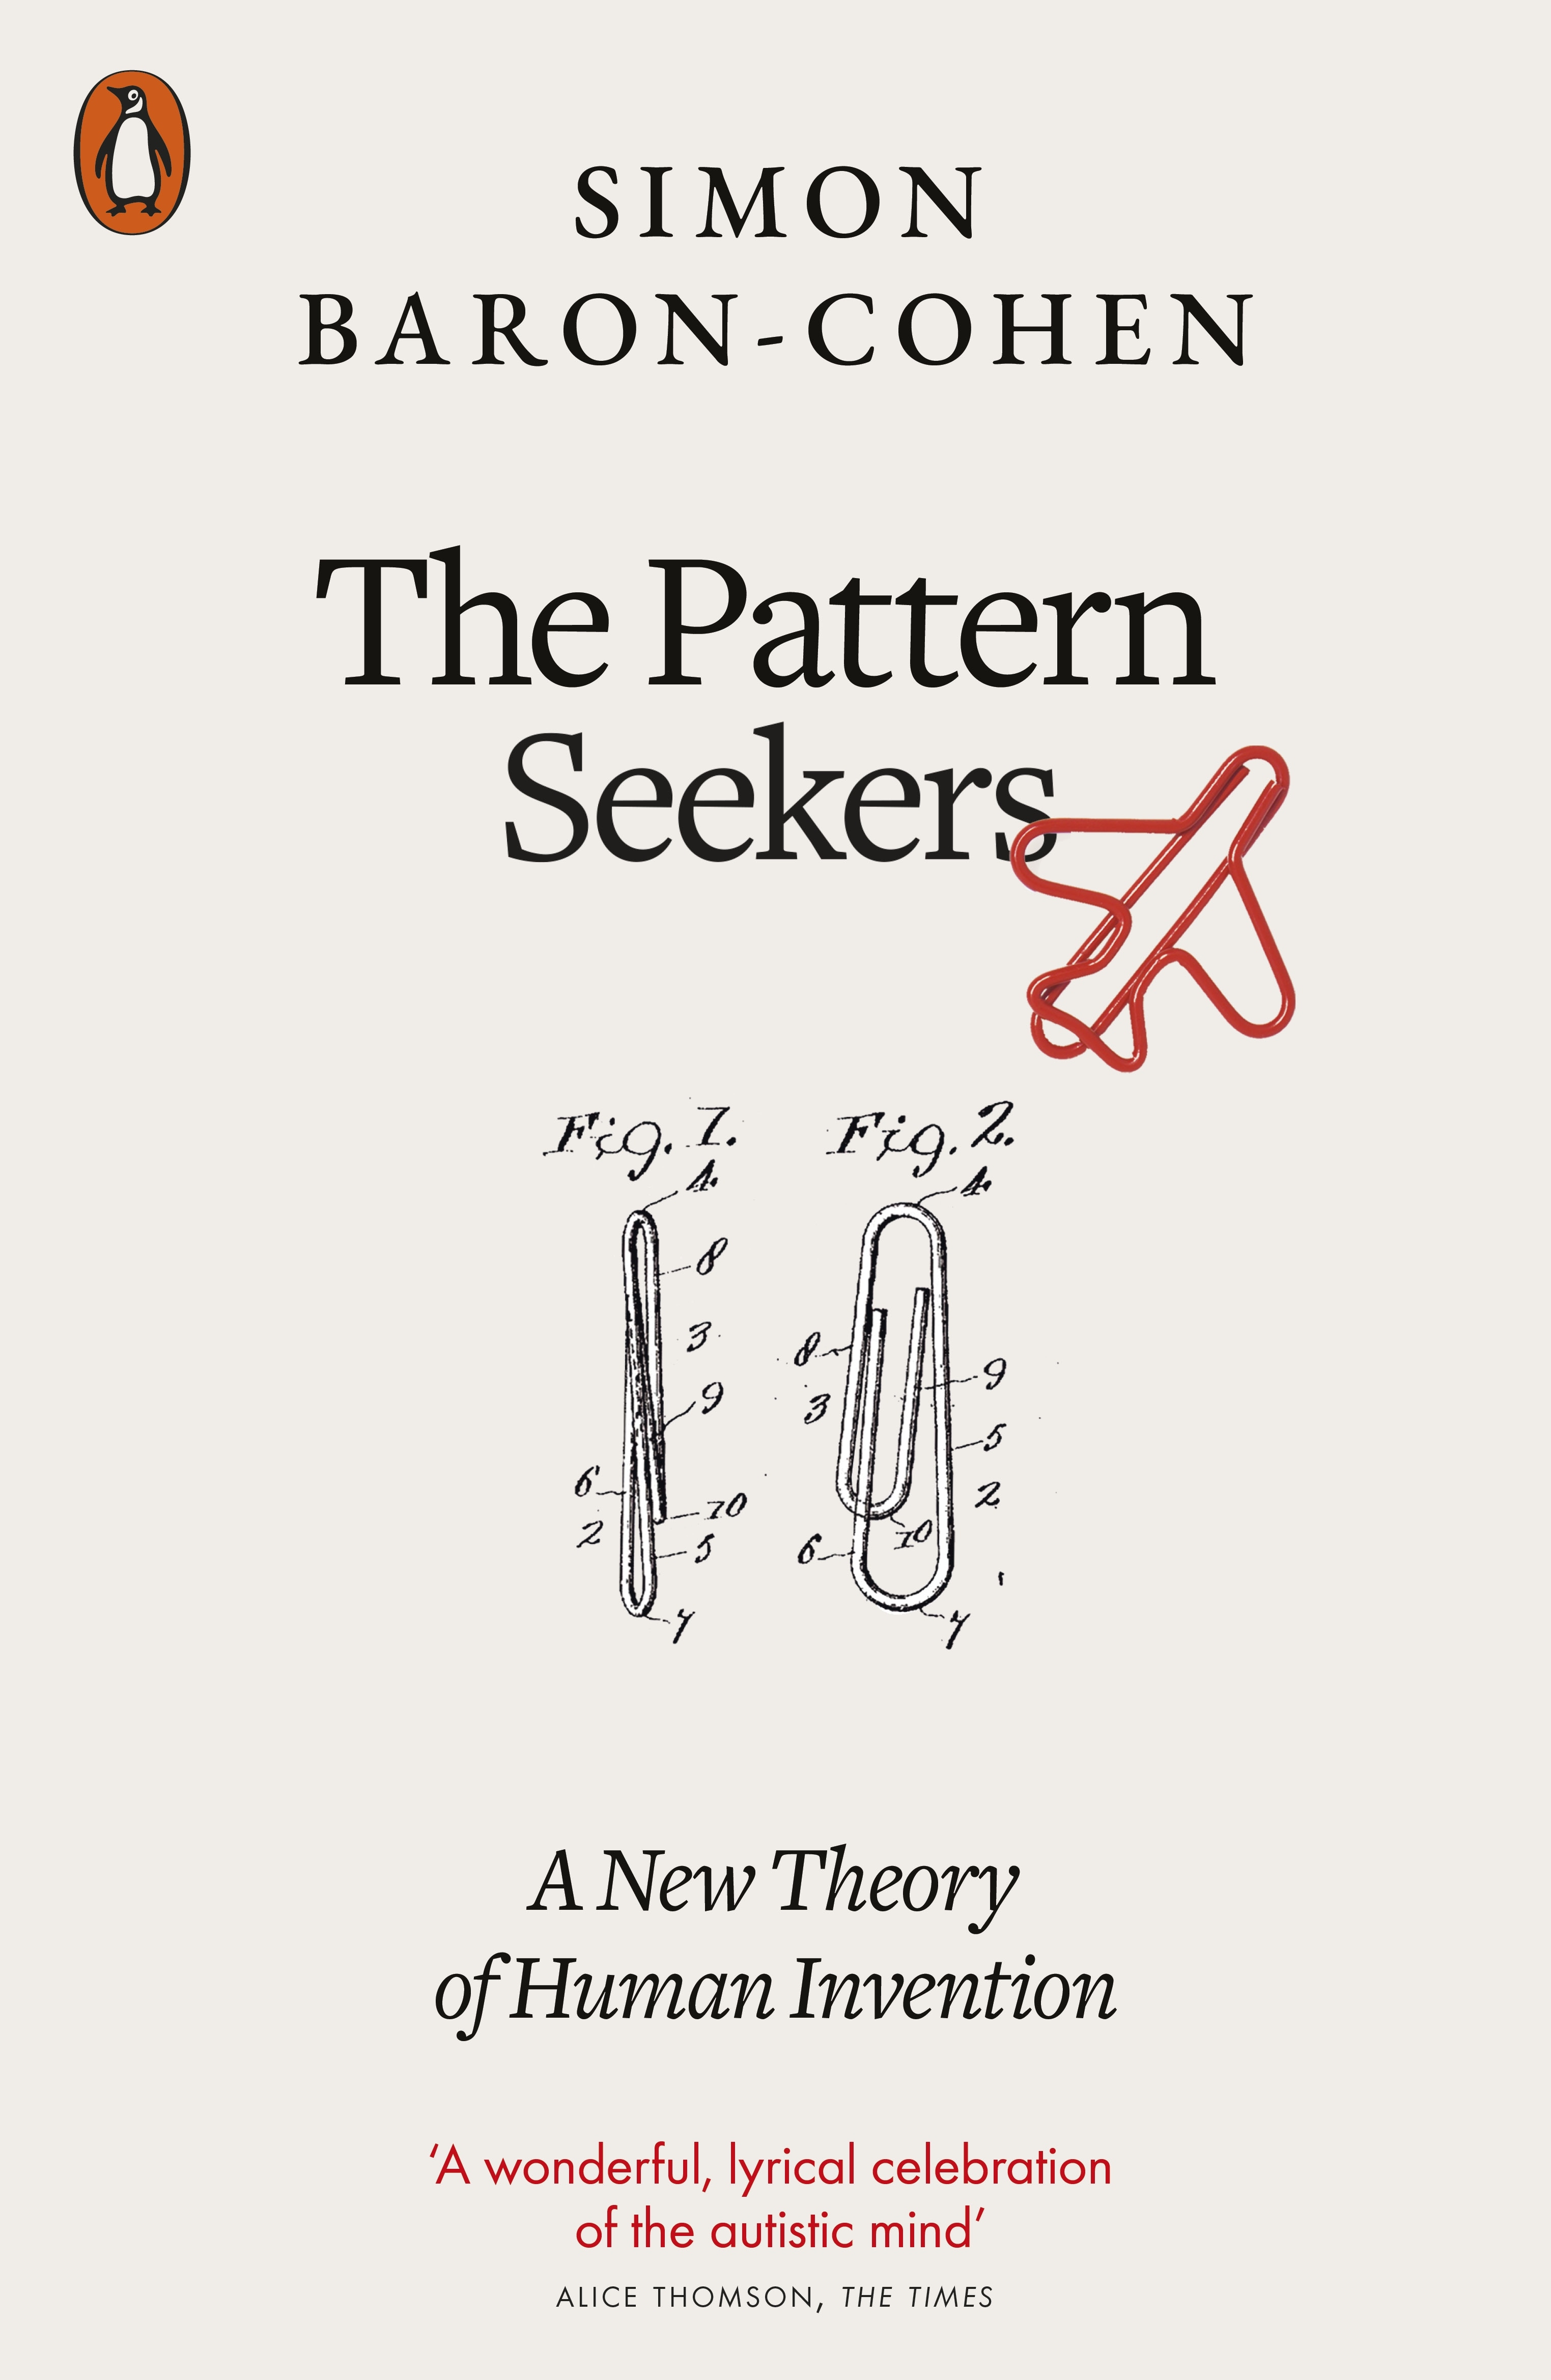 Book “The Pattern Seekers” by Simon Baron-Cohen — March 31, 2022